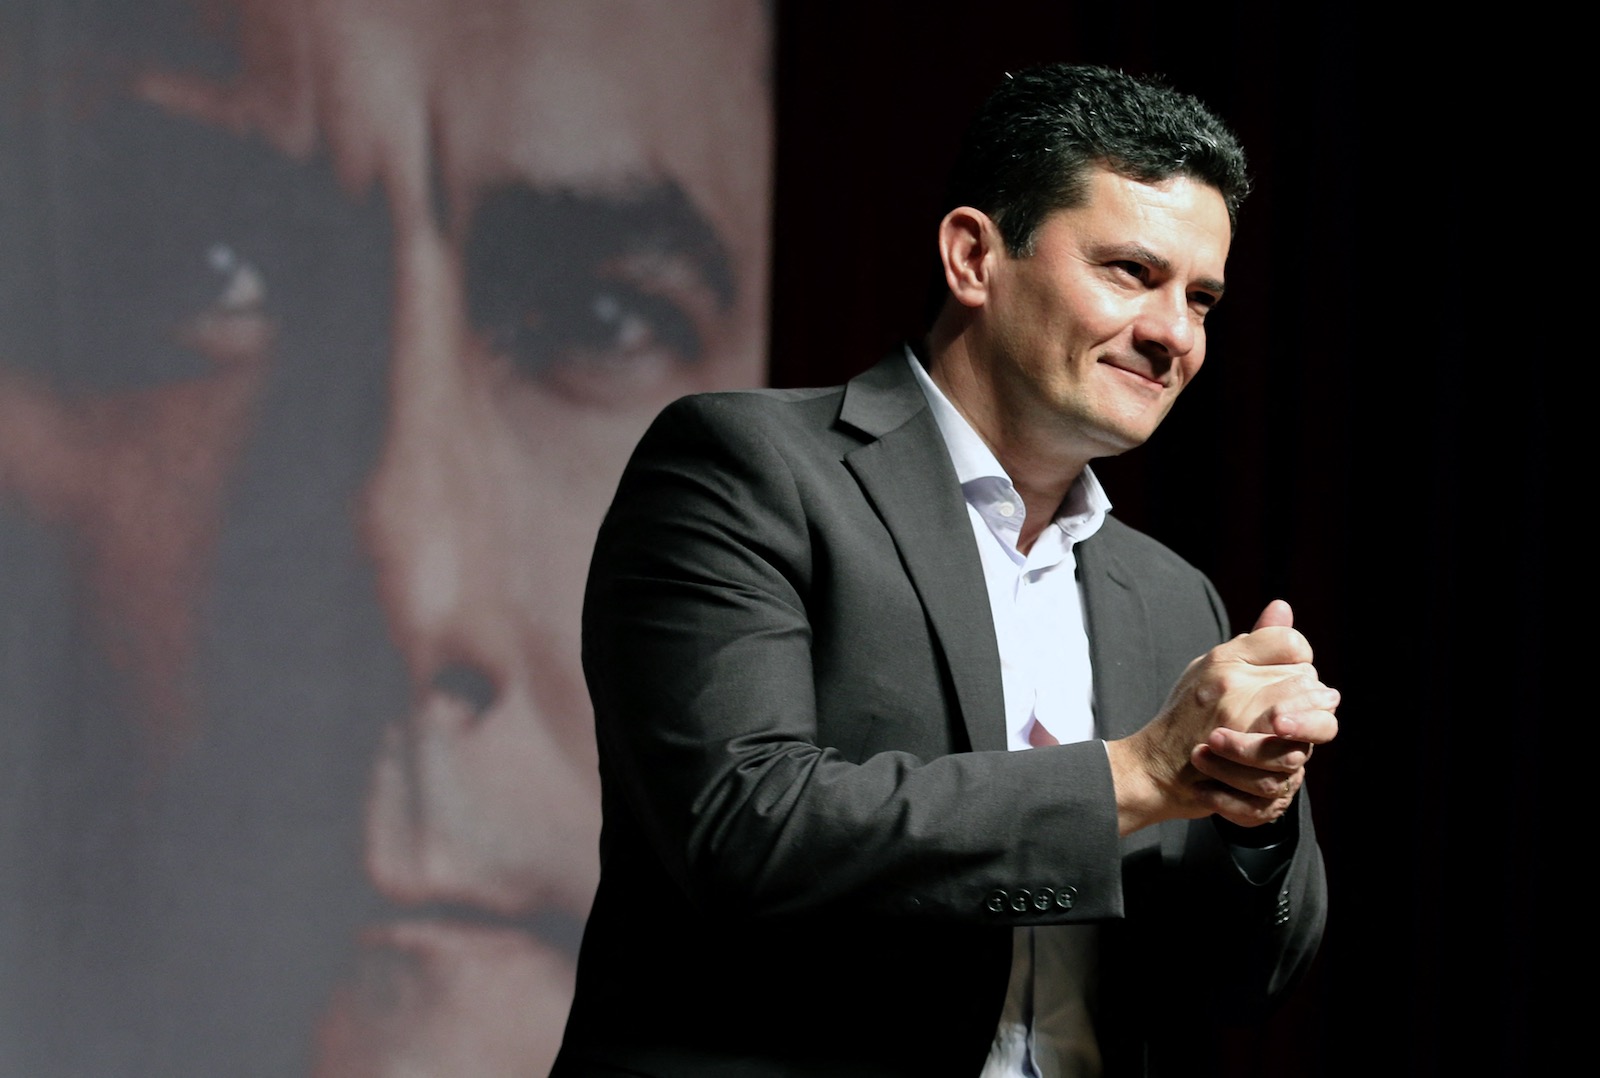 Former judge and justice minister Sergio Moro